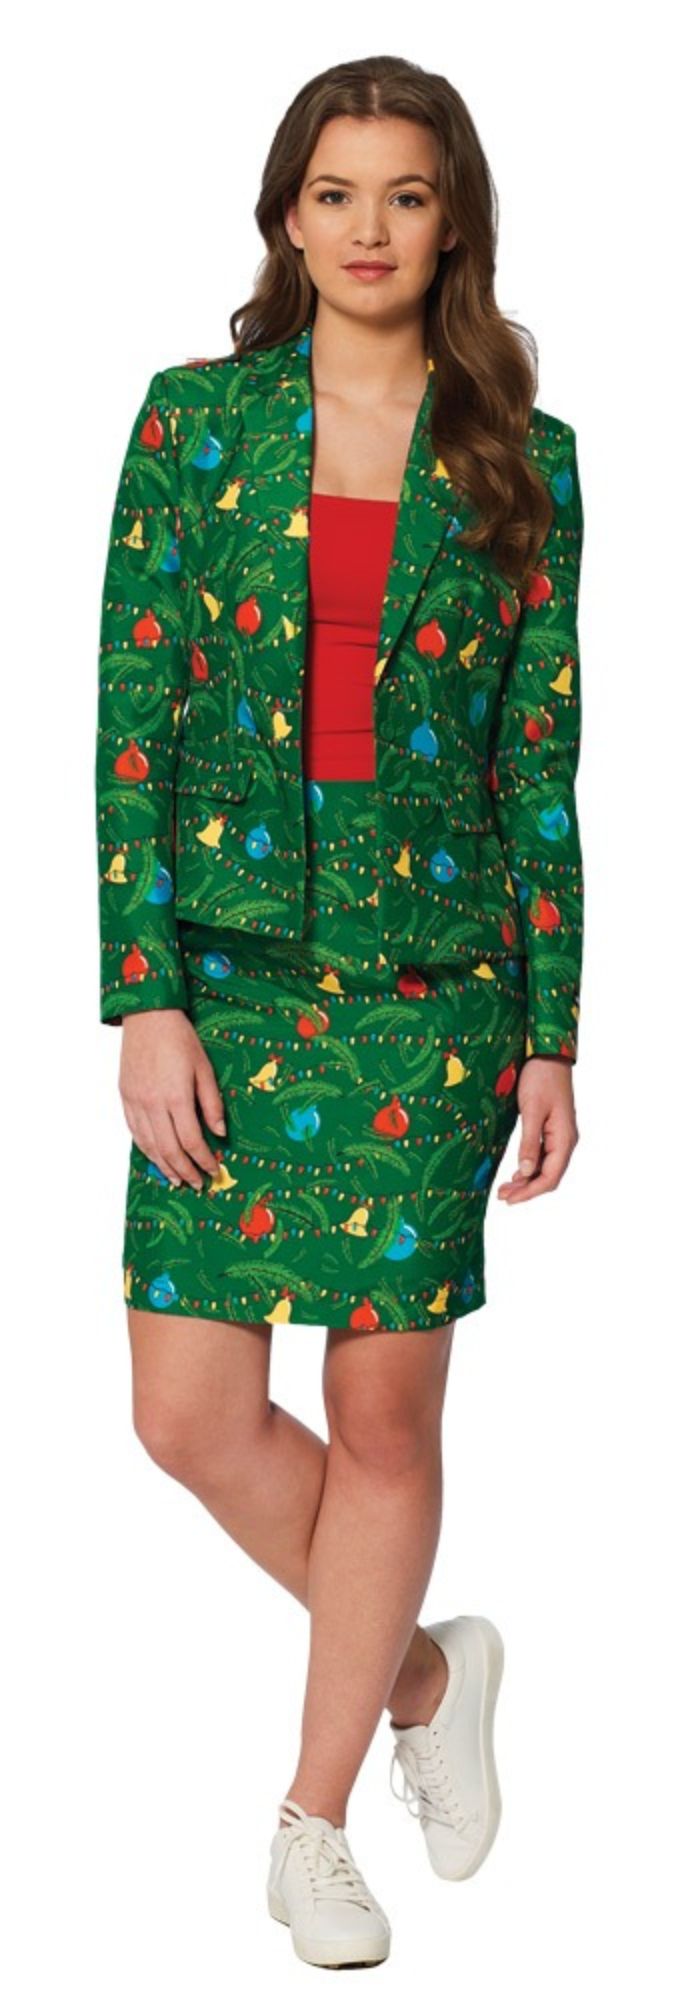 The Costume Center Green and Red Women Adult Christmas Tree Suit Costume - Large